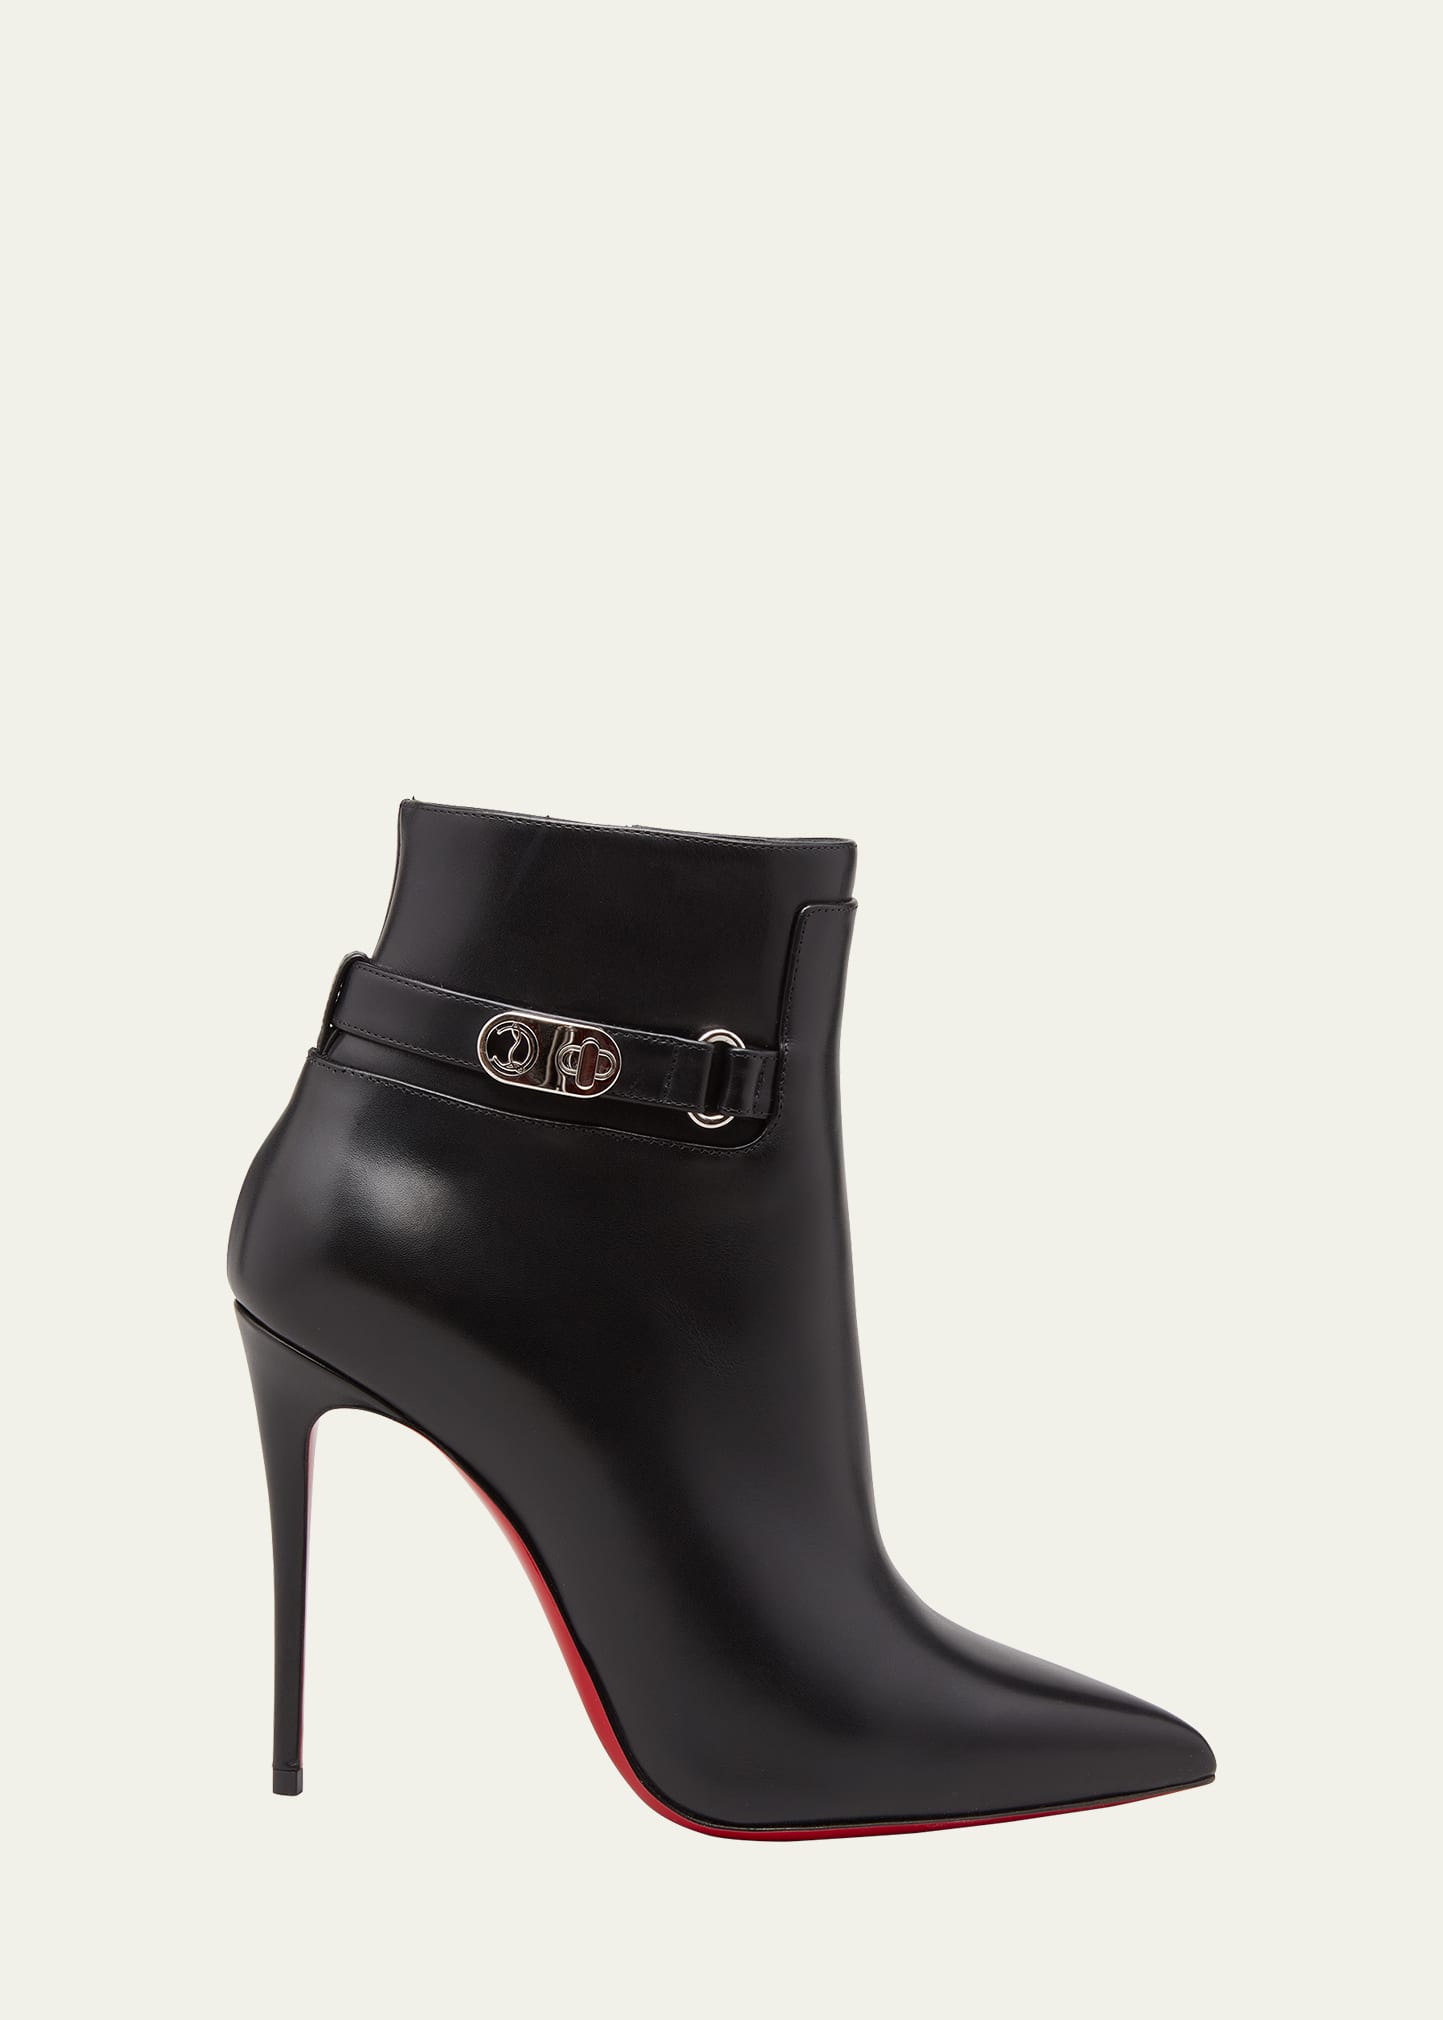 Christian Louboutin Lock So Kate Leather Red Sole Booties